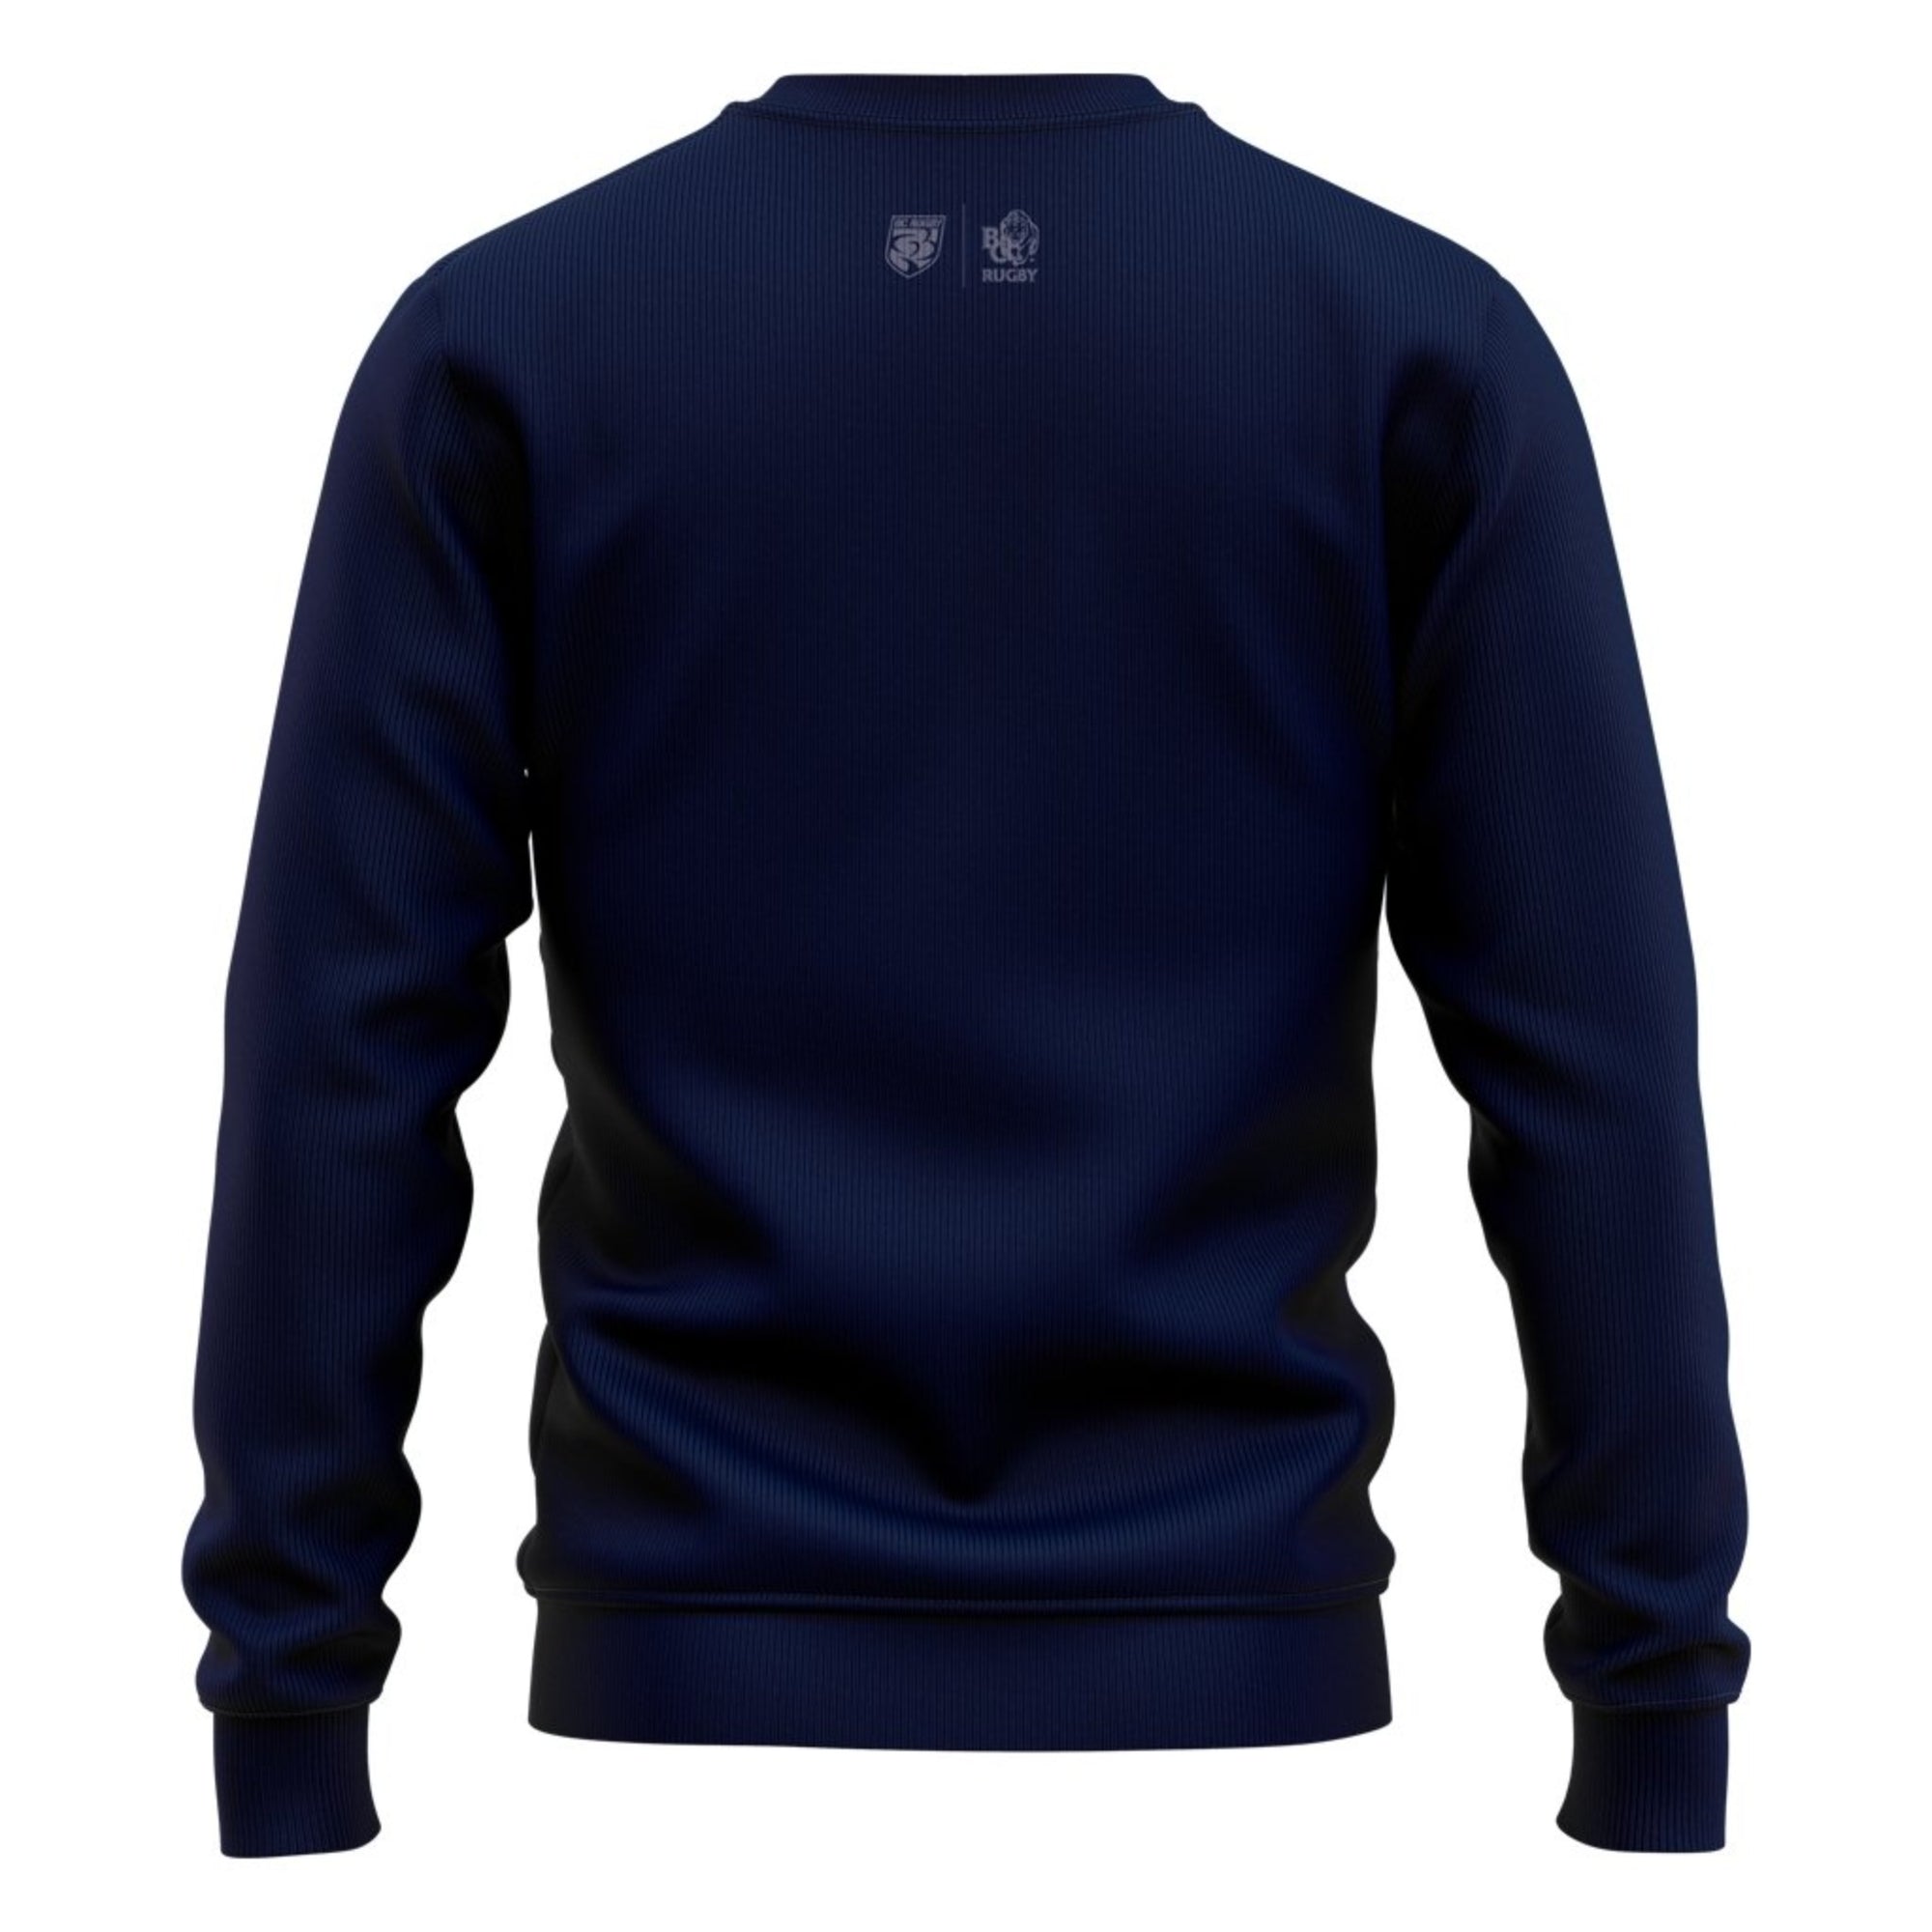 BC Rugby 2021 "Small Logo Team" Crew Neck Sweater - Adult Unisex - www.therugbyshop.com www.therugbyshop.com ADULT UNISEX / NAVY / S XIX Brands HOODIES BC Rugby 2021 "Small Logo Team" Crew Neck Sweater - Adult Unisex